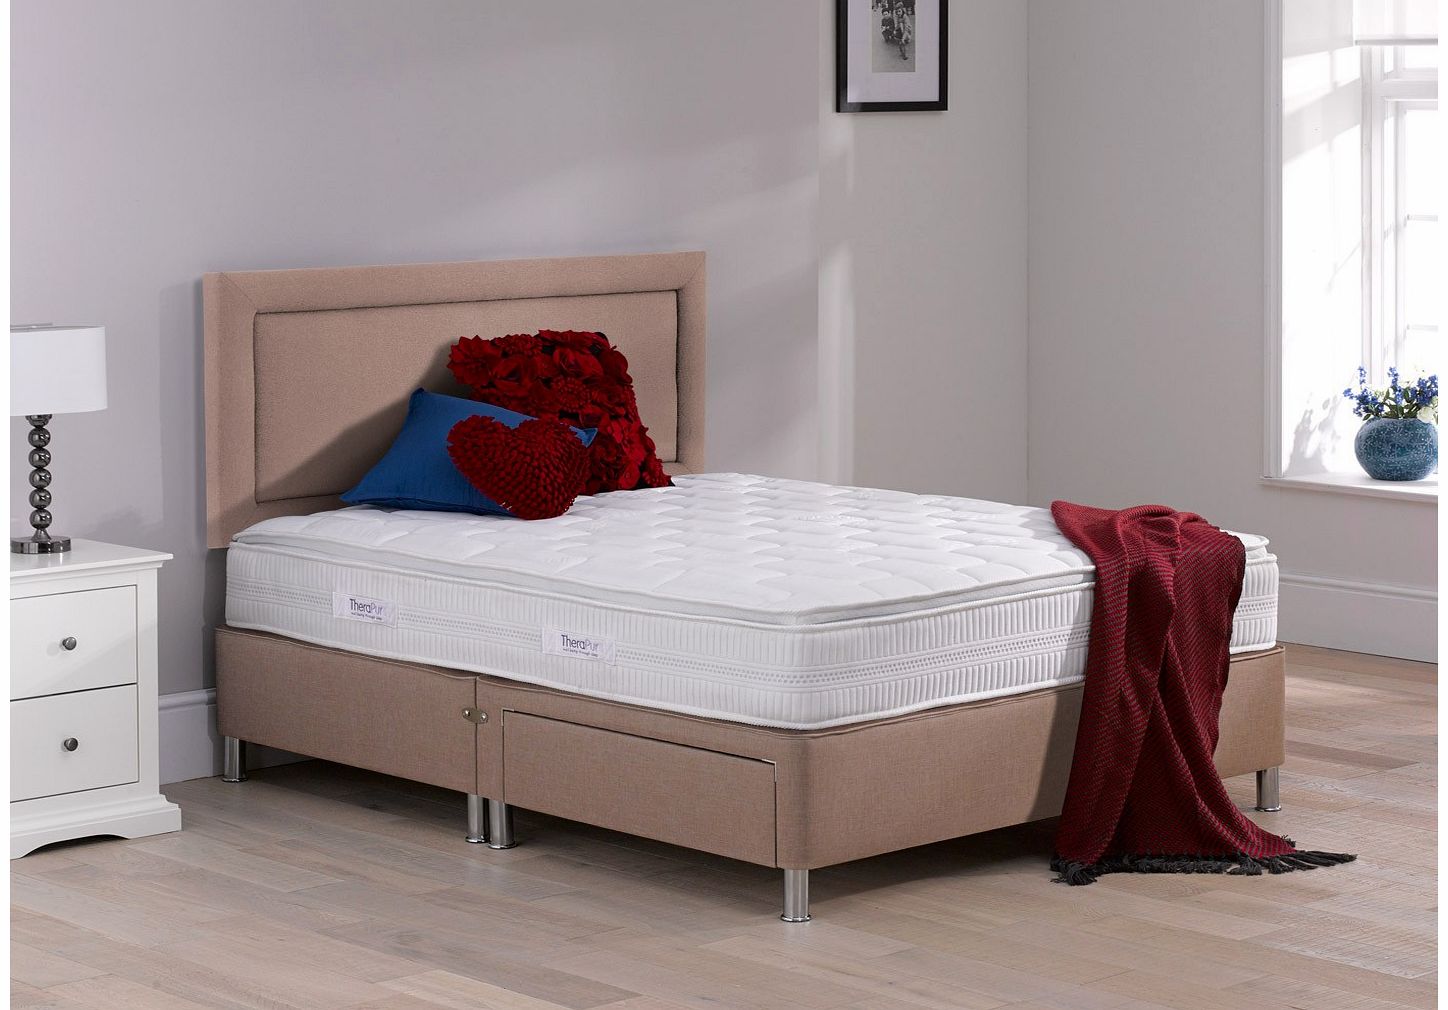 4`6 Double Therapur Rapport Divan Bed With Legs - Medium Firm